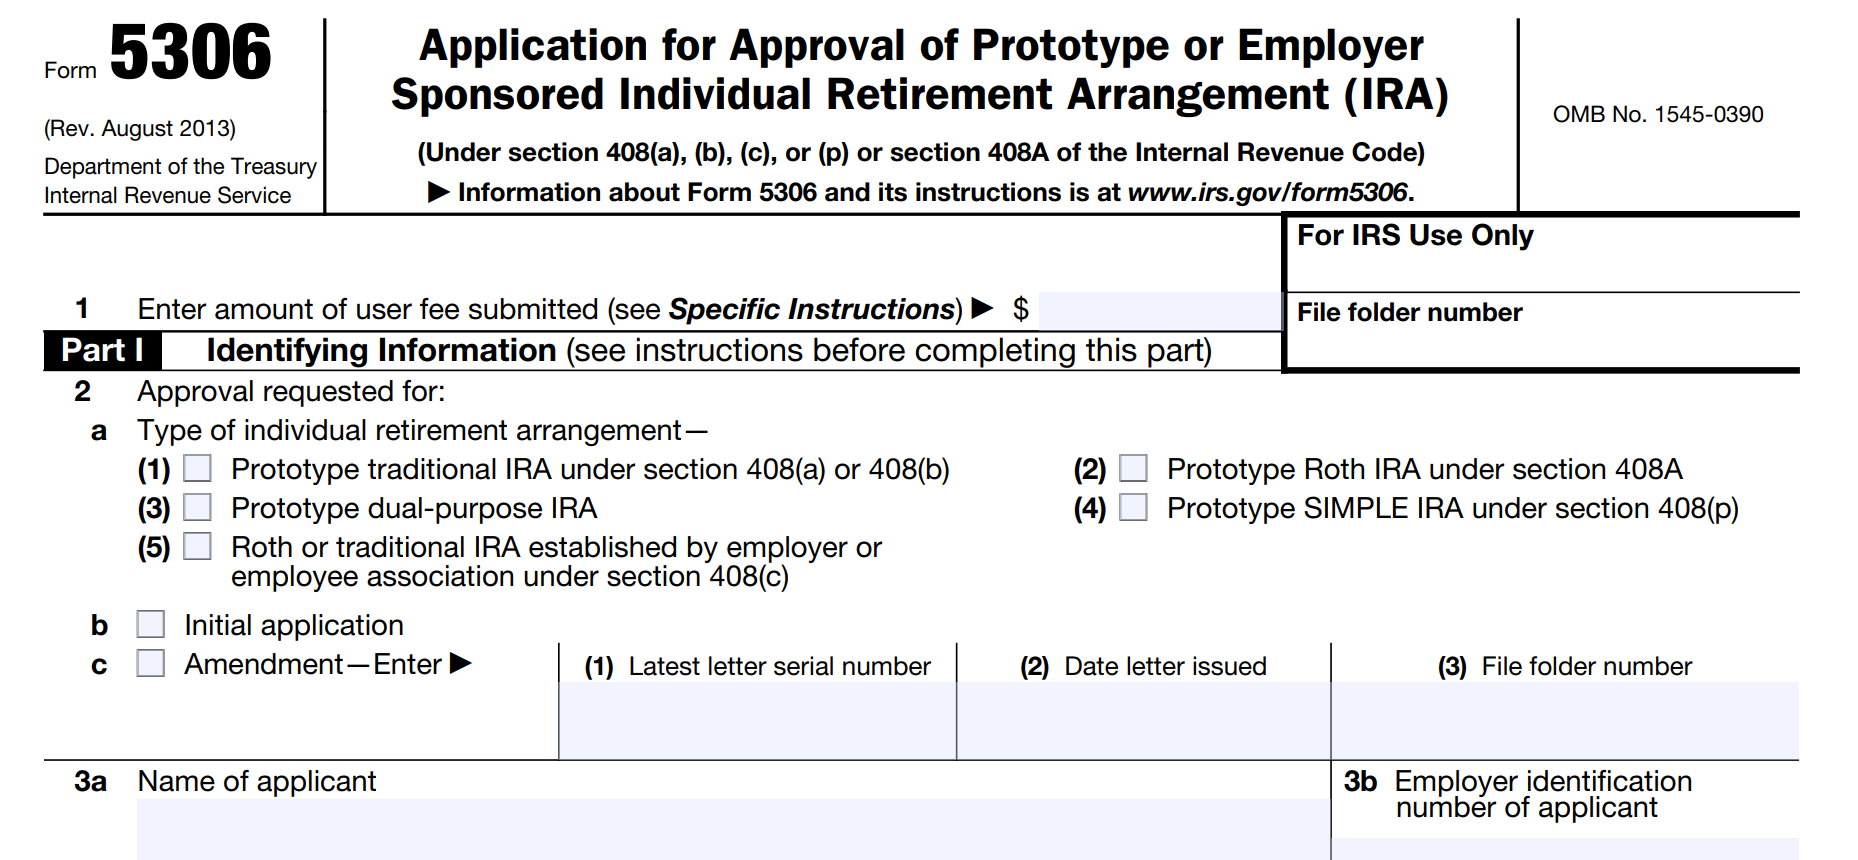 Form 5306: Application for Approval of Prototype or Employer Sponsored Individual Retirement Arrangement (IRA)